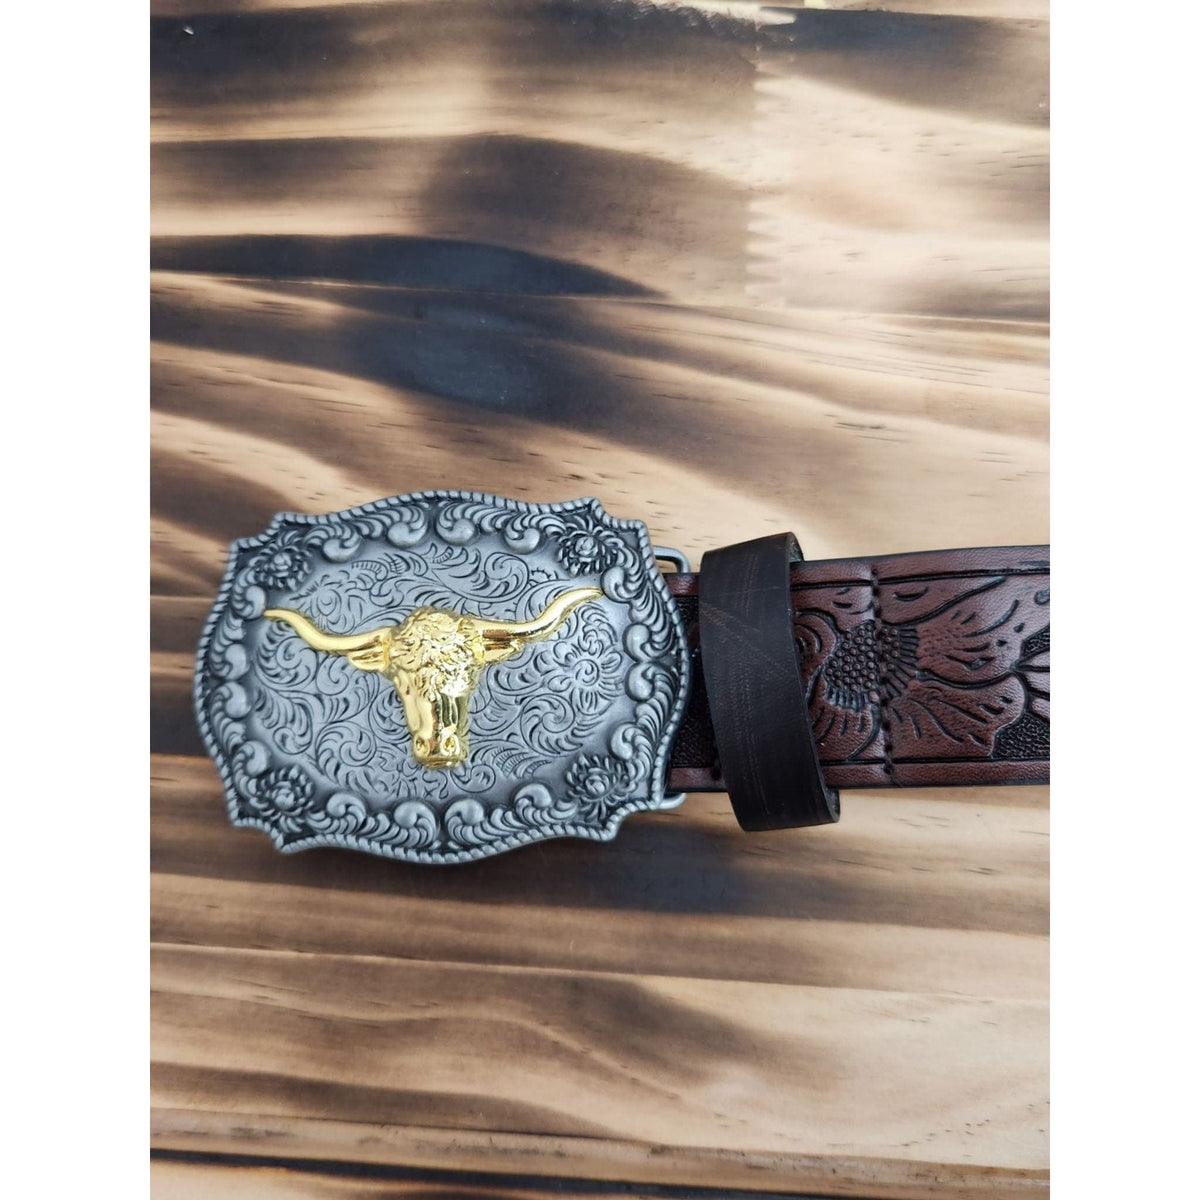 Bull Rider Belt with Buckle TheFringeCultureCollective